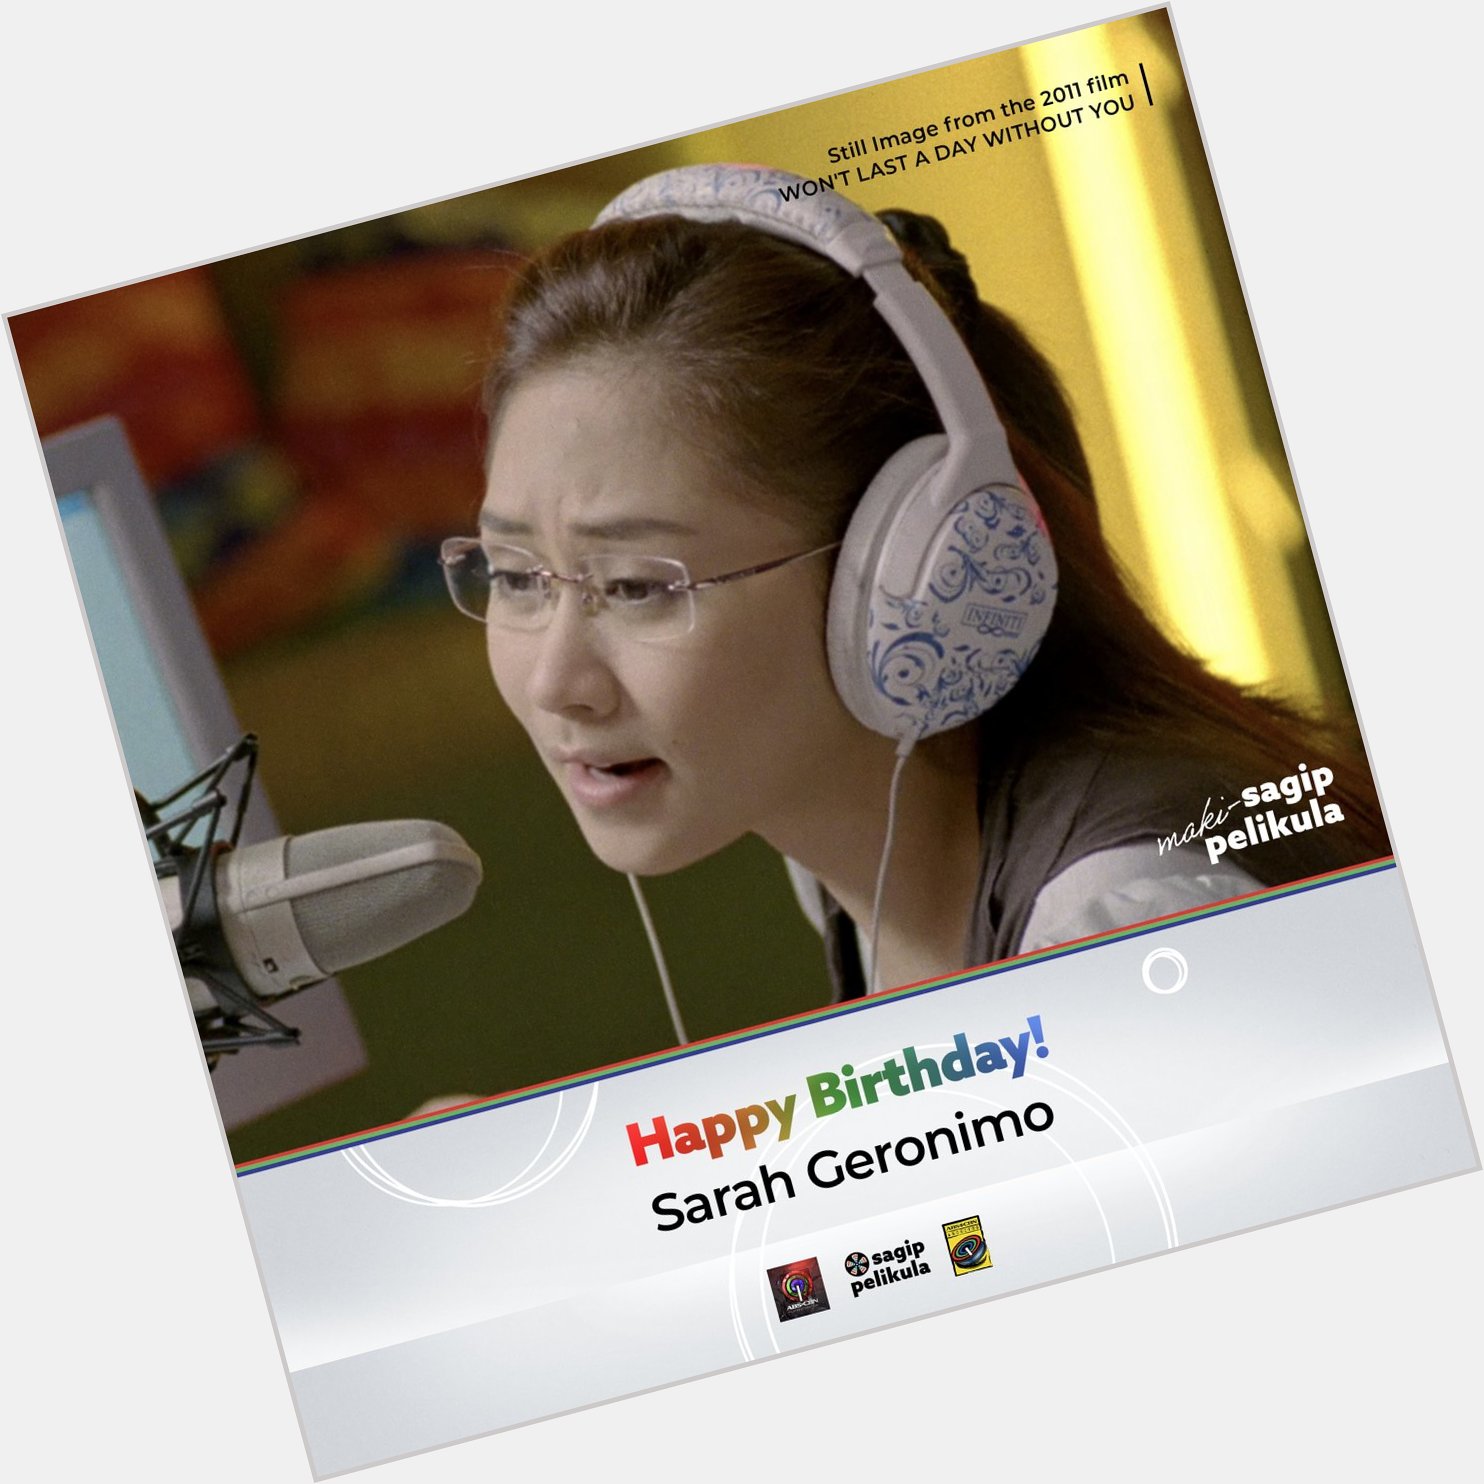 Happy birthday to Sarah Geronimo!

What\s your favorite film of hers?  